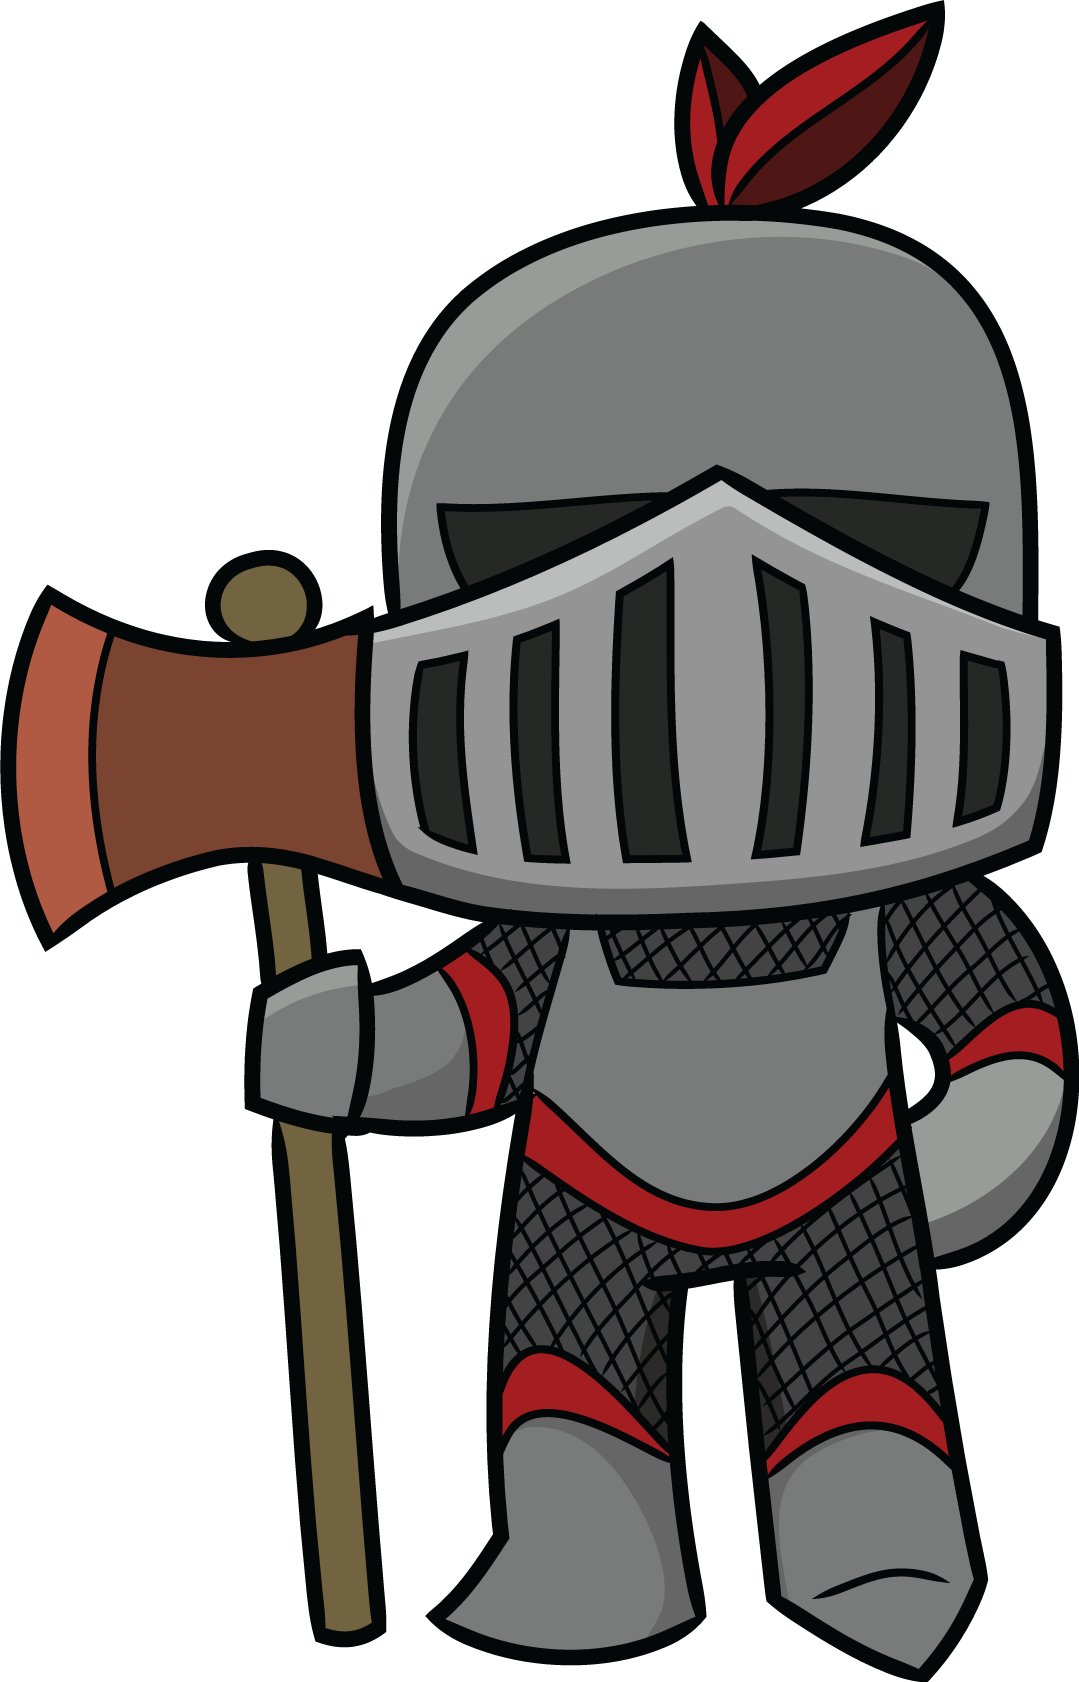 Knight clip art in vector or format free 5 - Clipartix